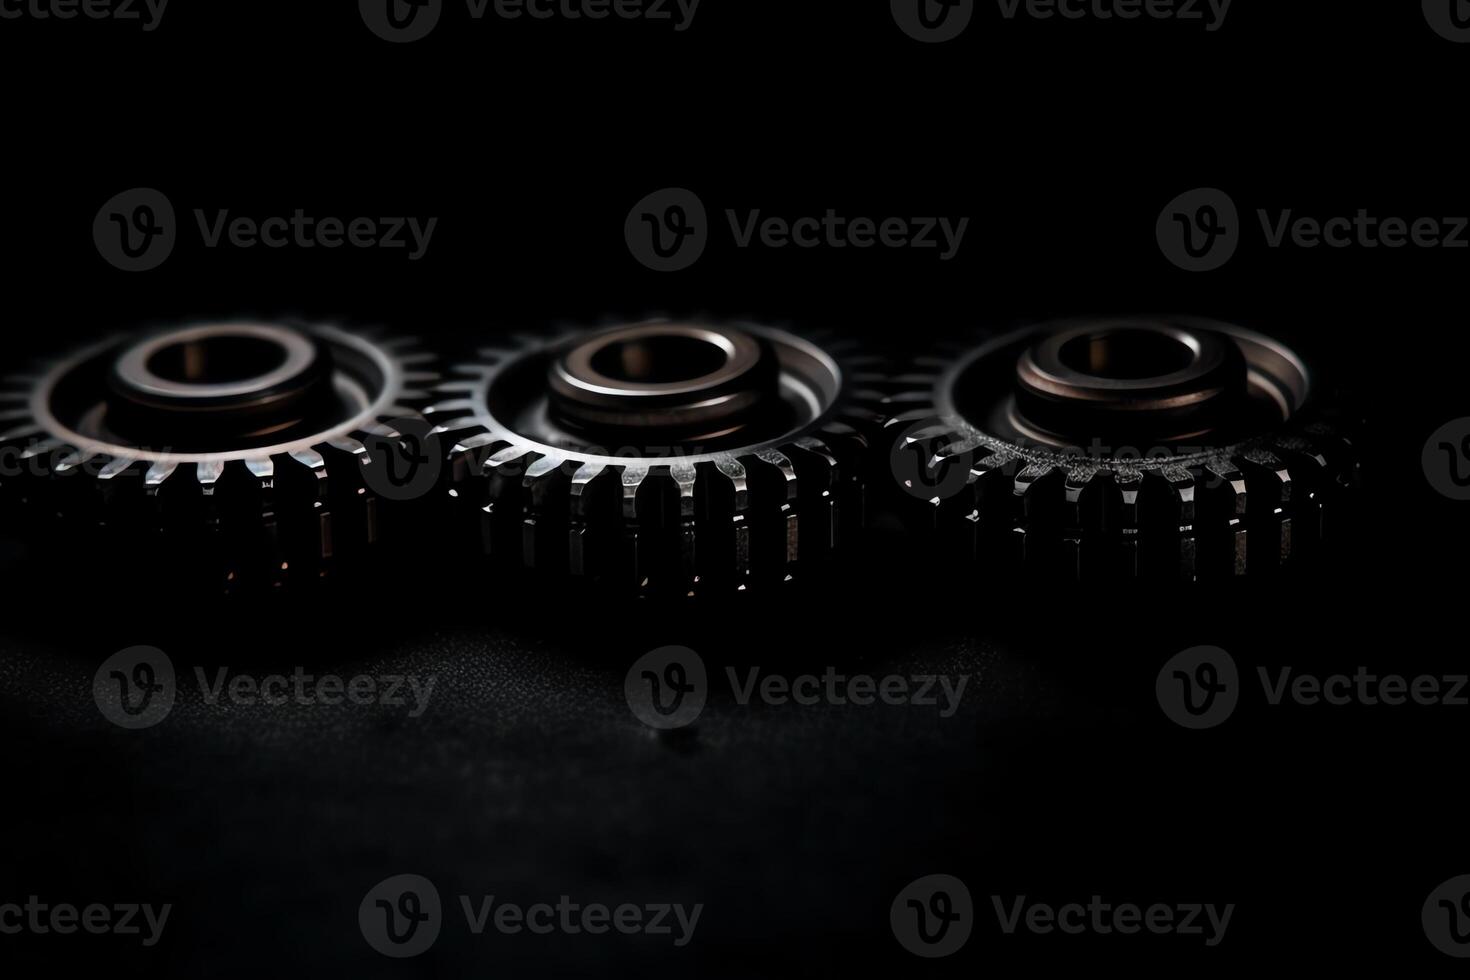 Two horizontal lines of the gear on a black background. photo